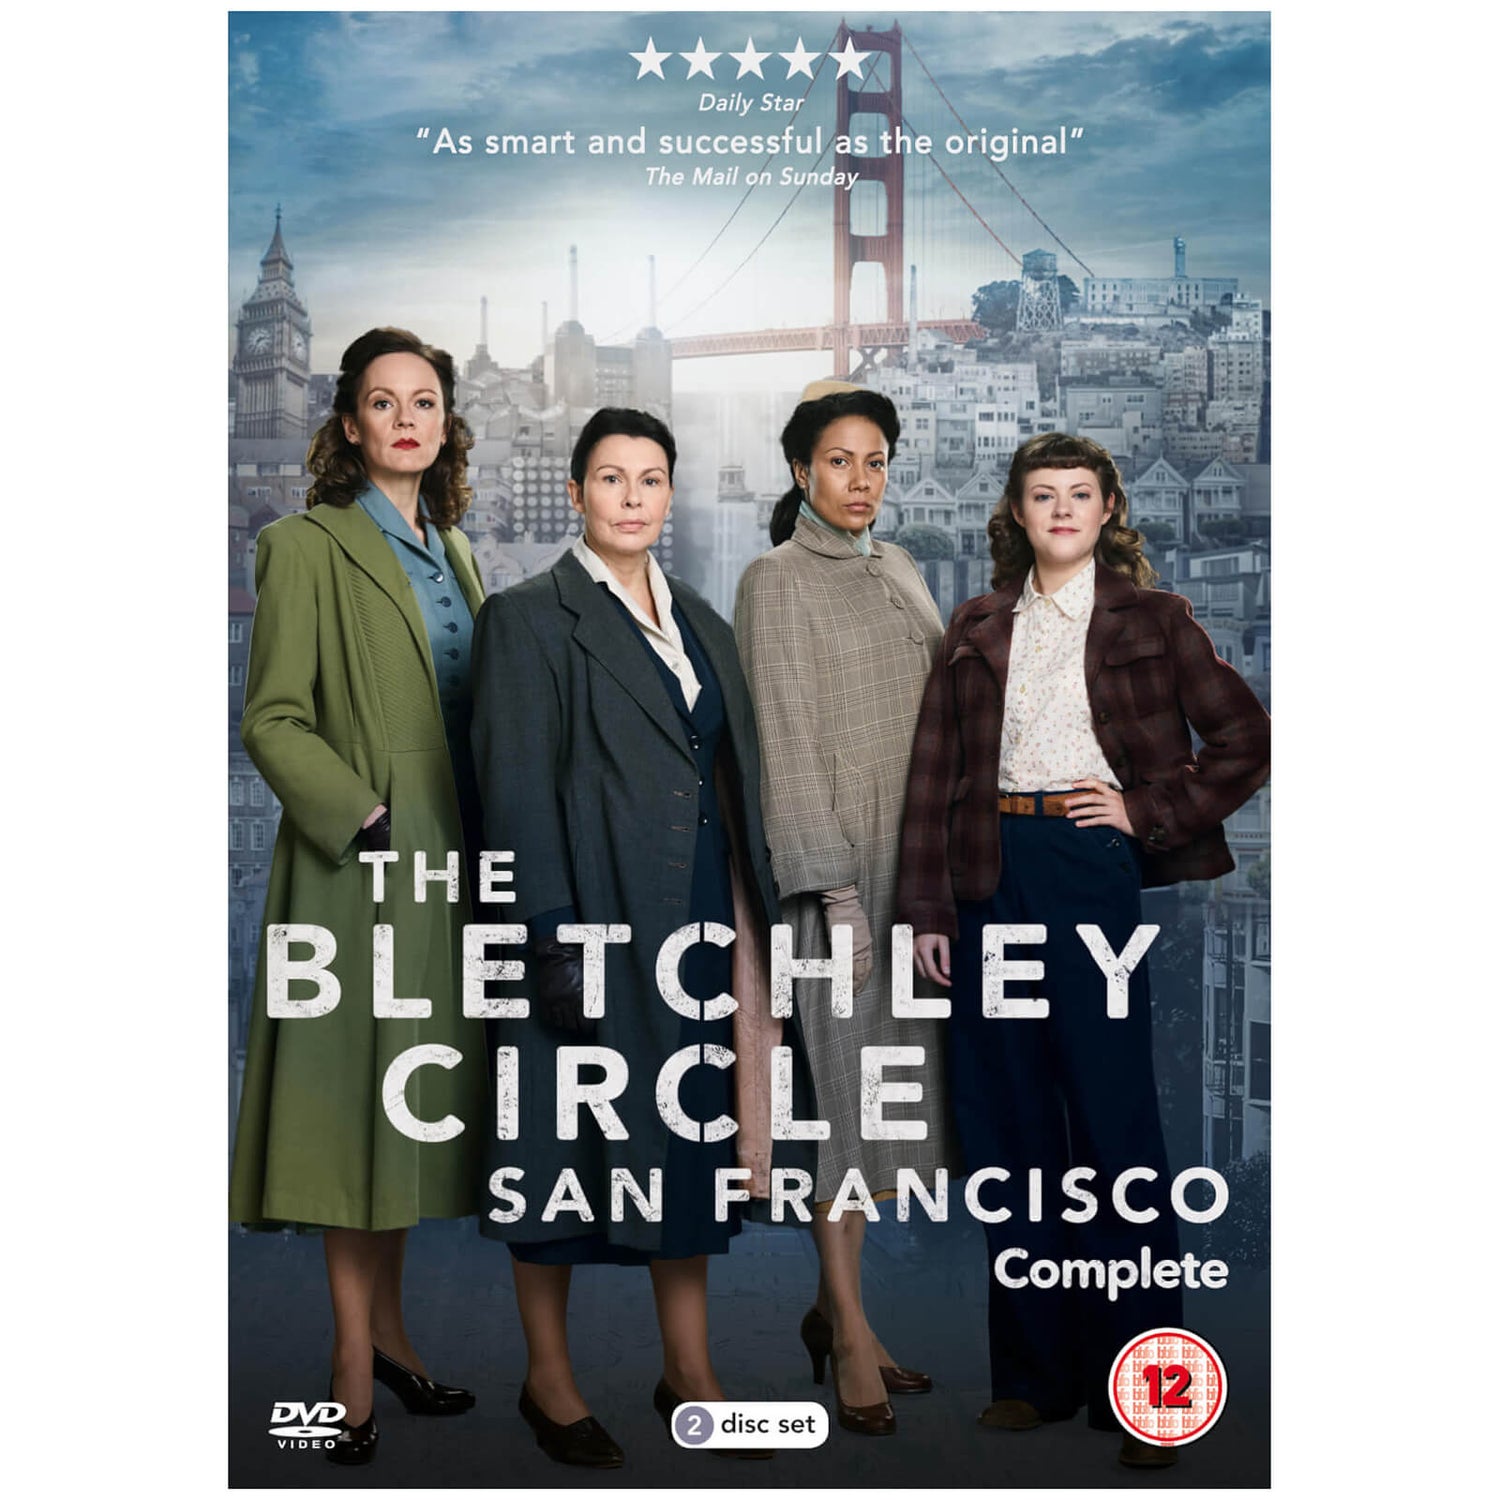 The Bletchley Circle San Francisco Complete